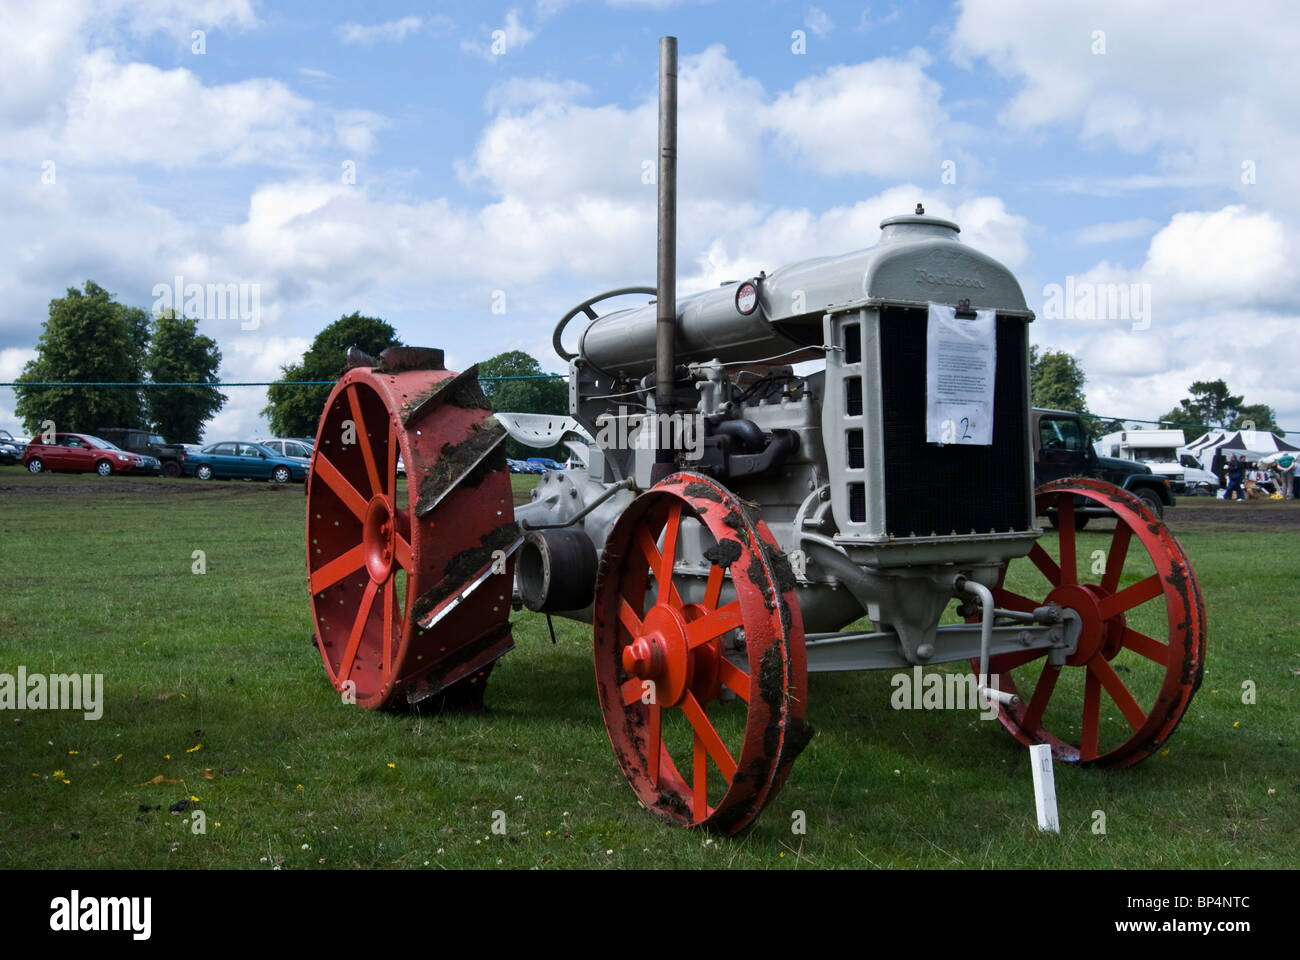 restored vintage grey fordson tractor with steel wheels at the astle park show ground Stock Photo